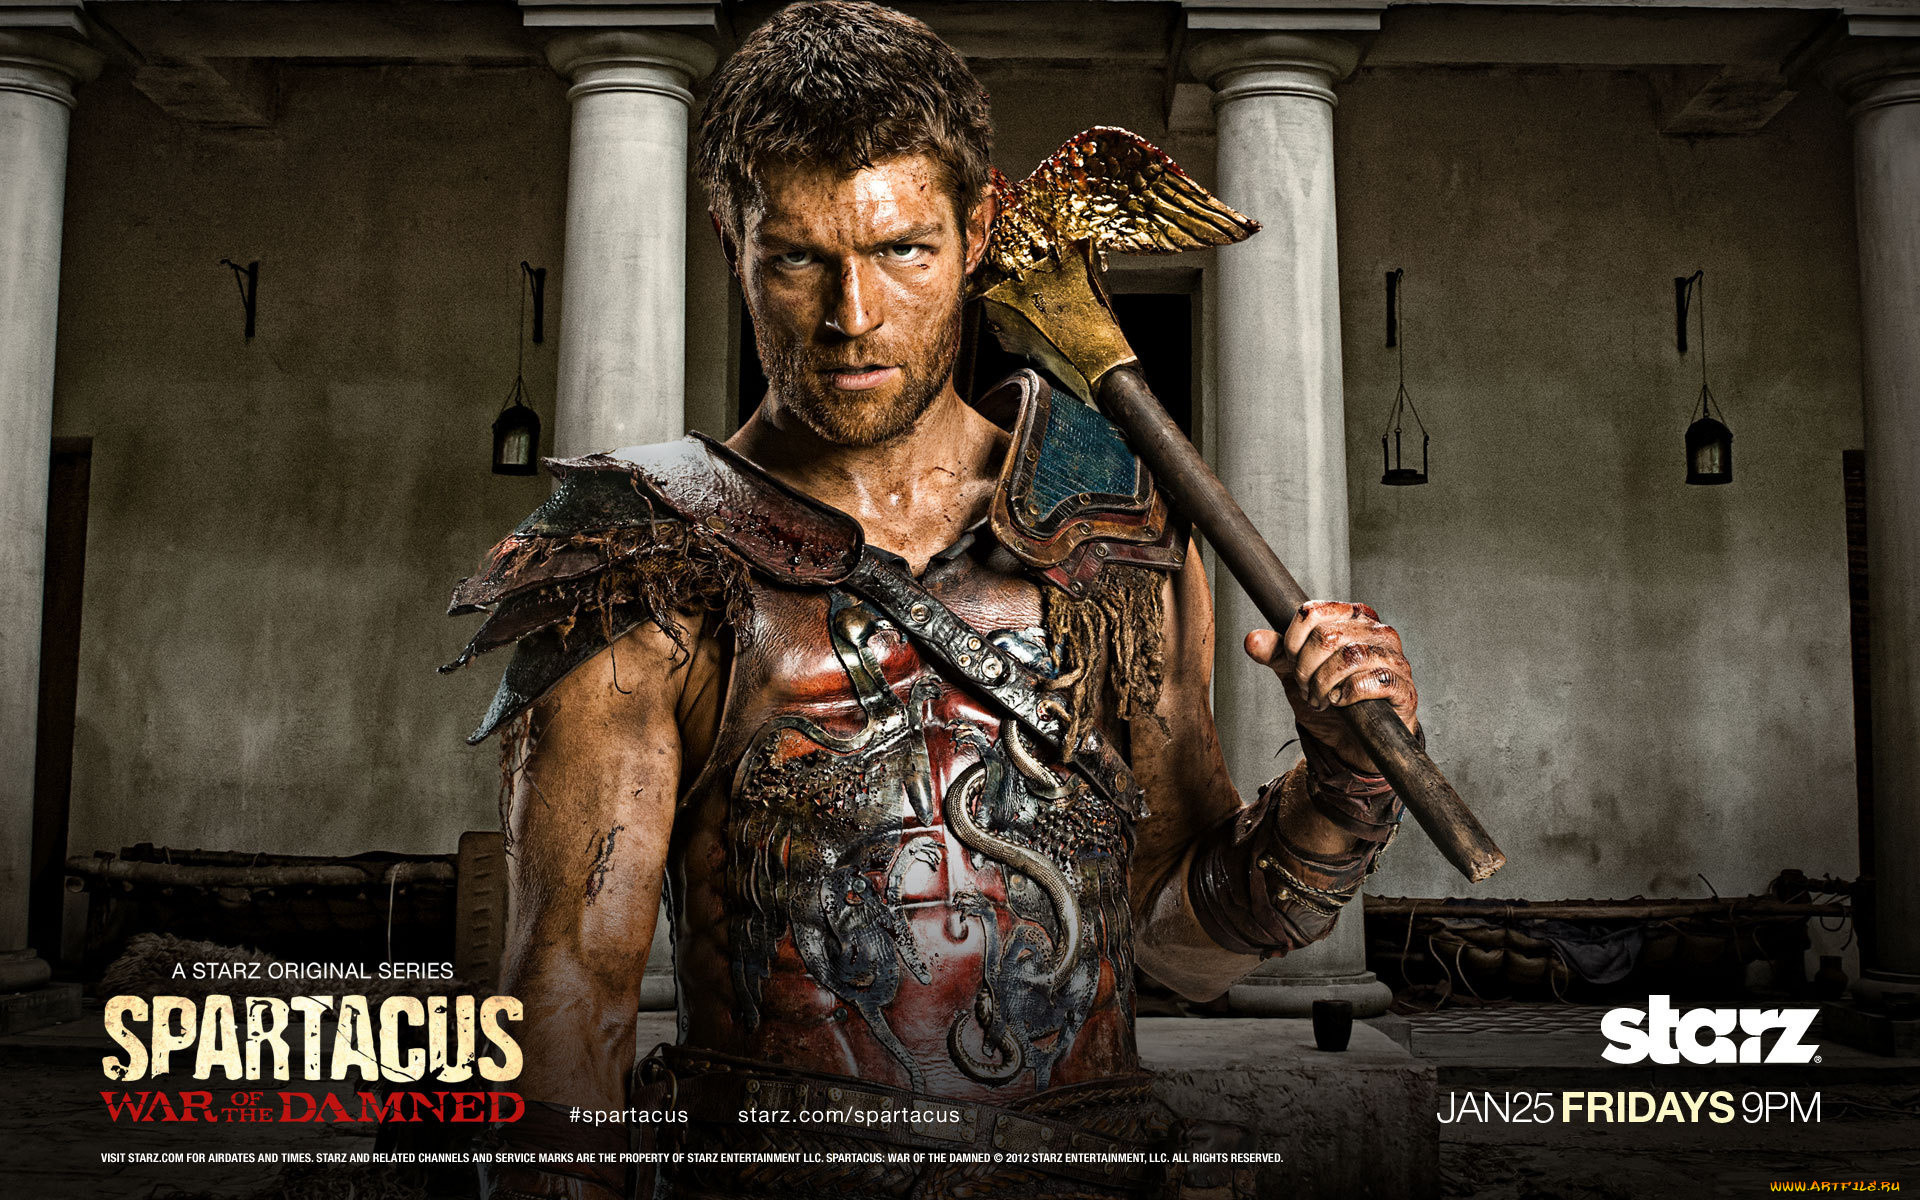  , spartacus,  war of the damned, of, war, , , , , damned, the